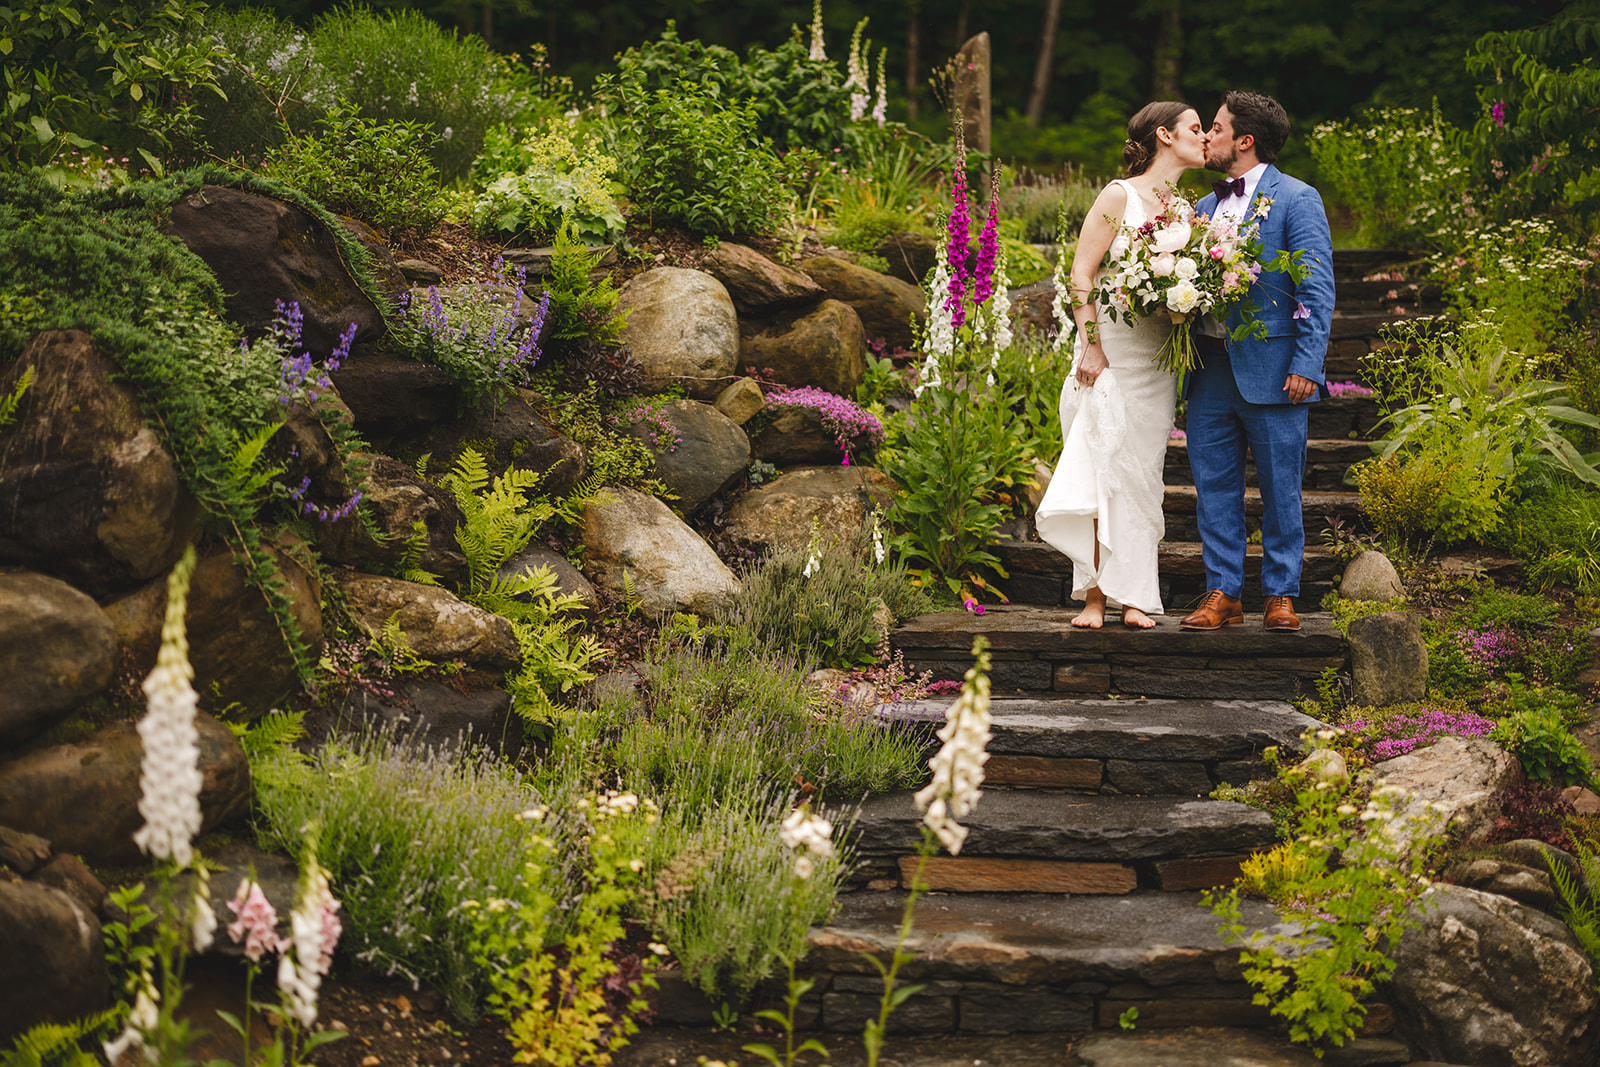 a barefoot bride in a white dress and her groom in a blue suit pose kiss on stone steps in a garden  